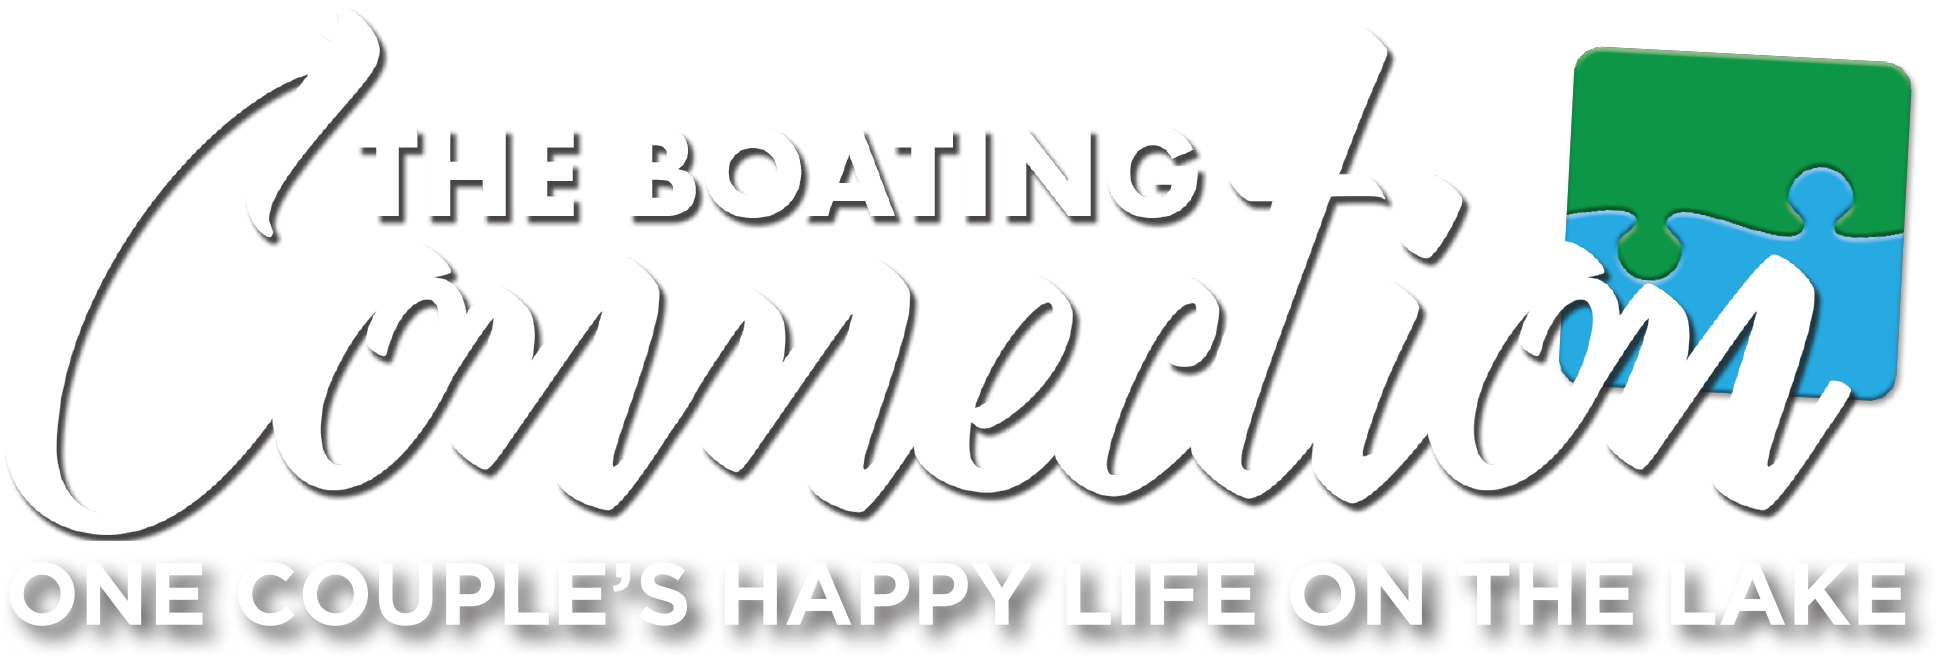 The Boating Connection: One couple's happy life on the lake